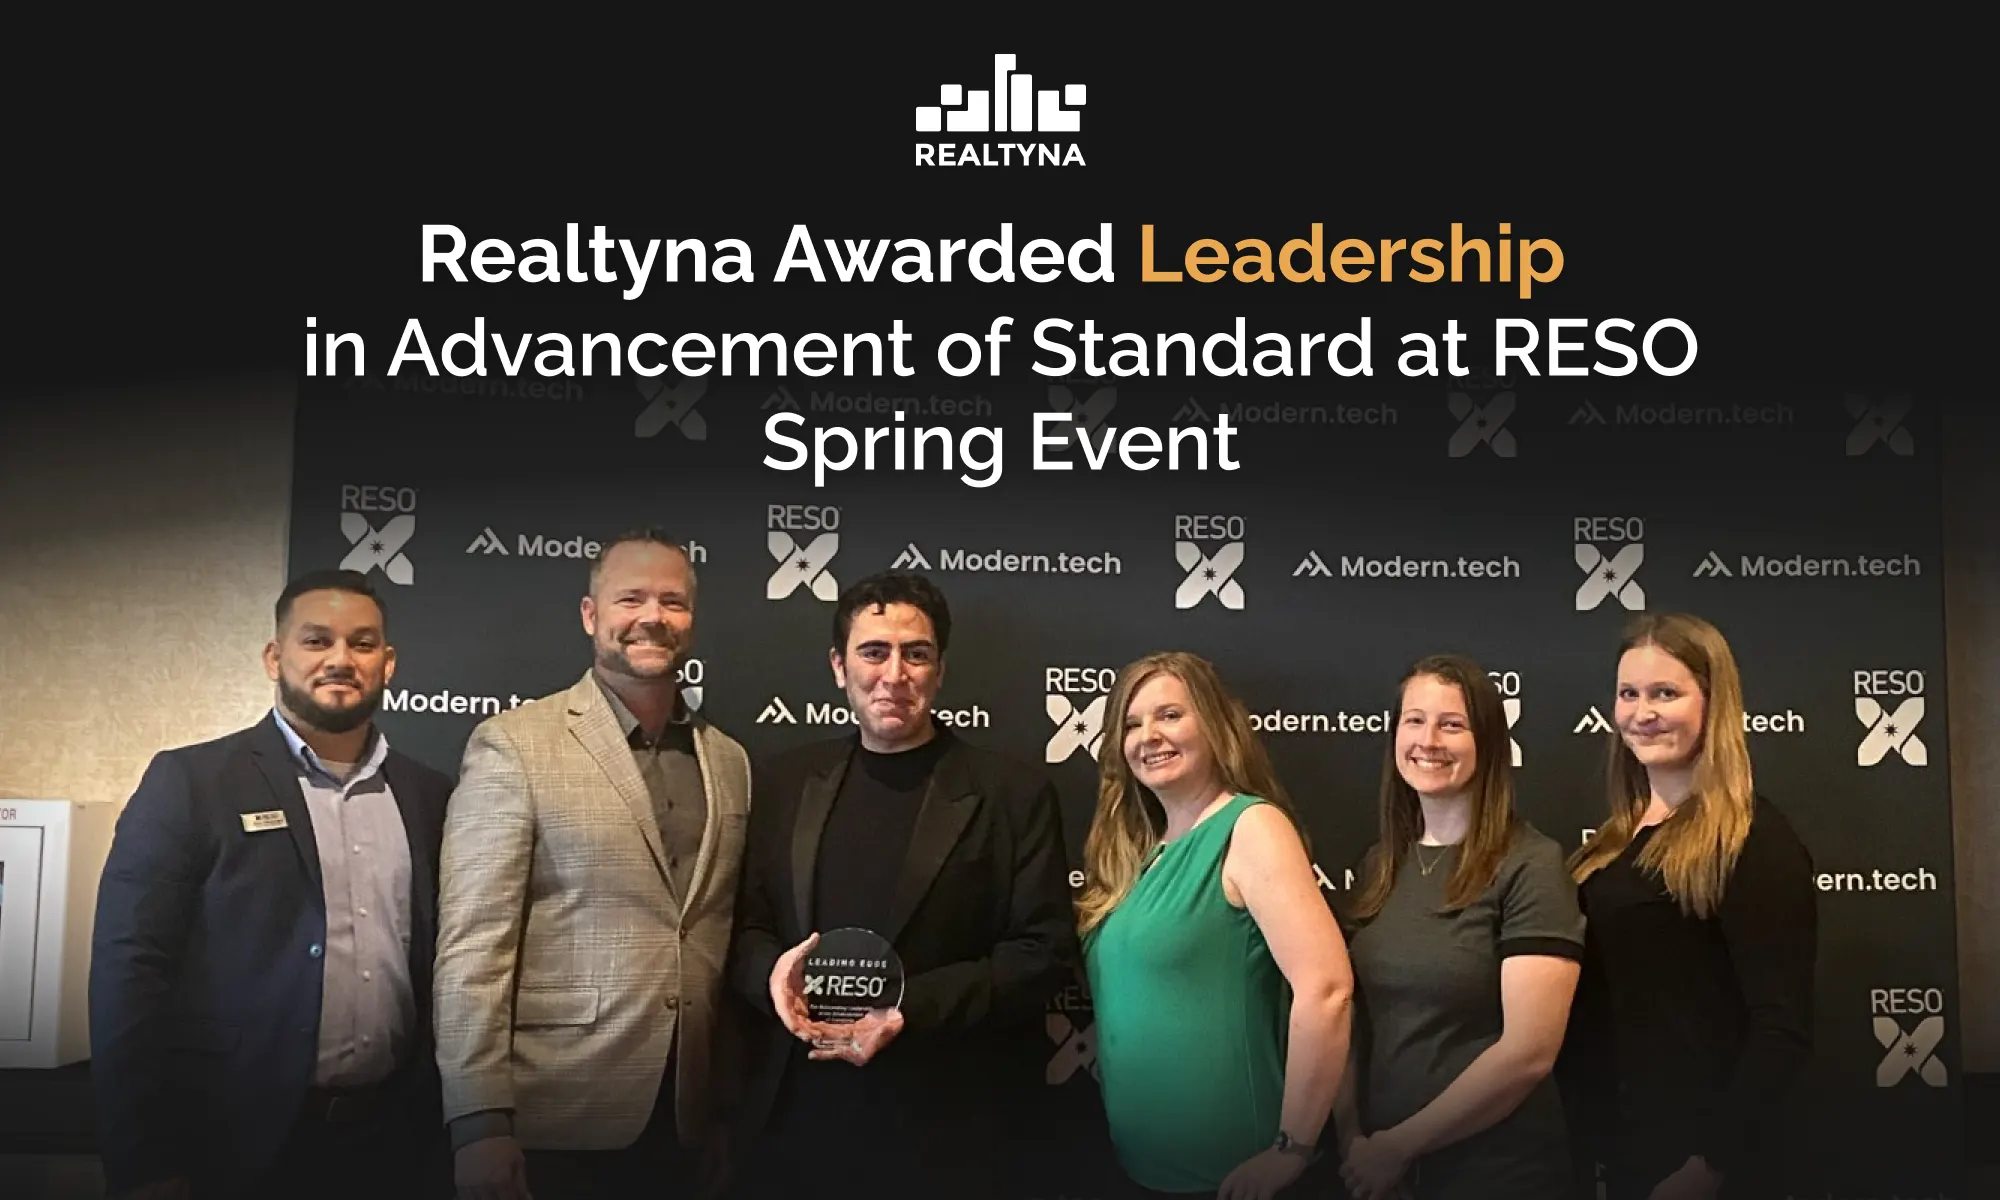 Realtyna Awarded Leadership in Advancement of Standard at RESO Spring Event